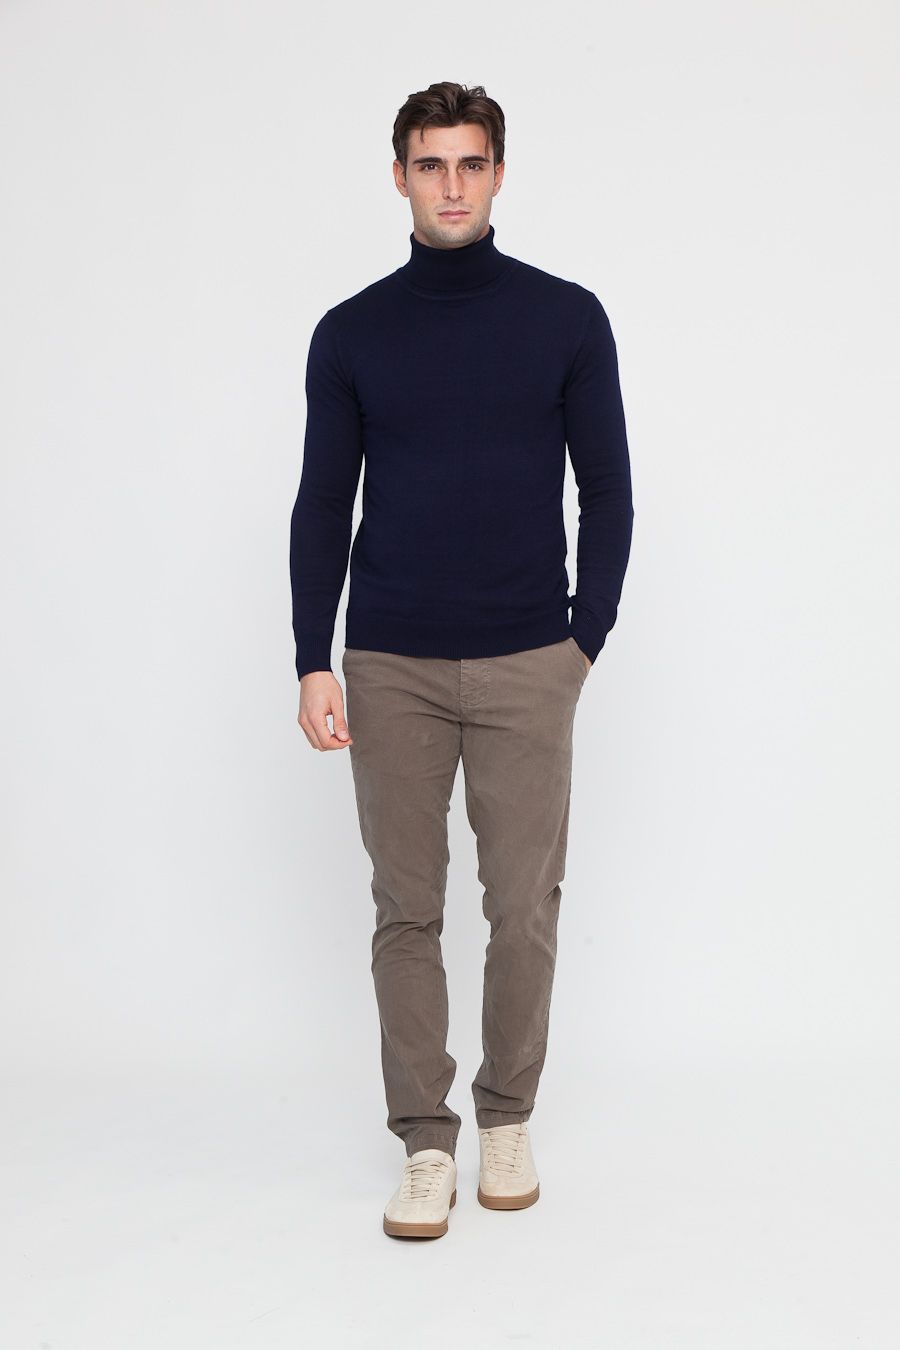 Turtleneck sweater and trousers set